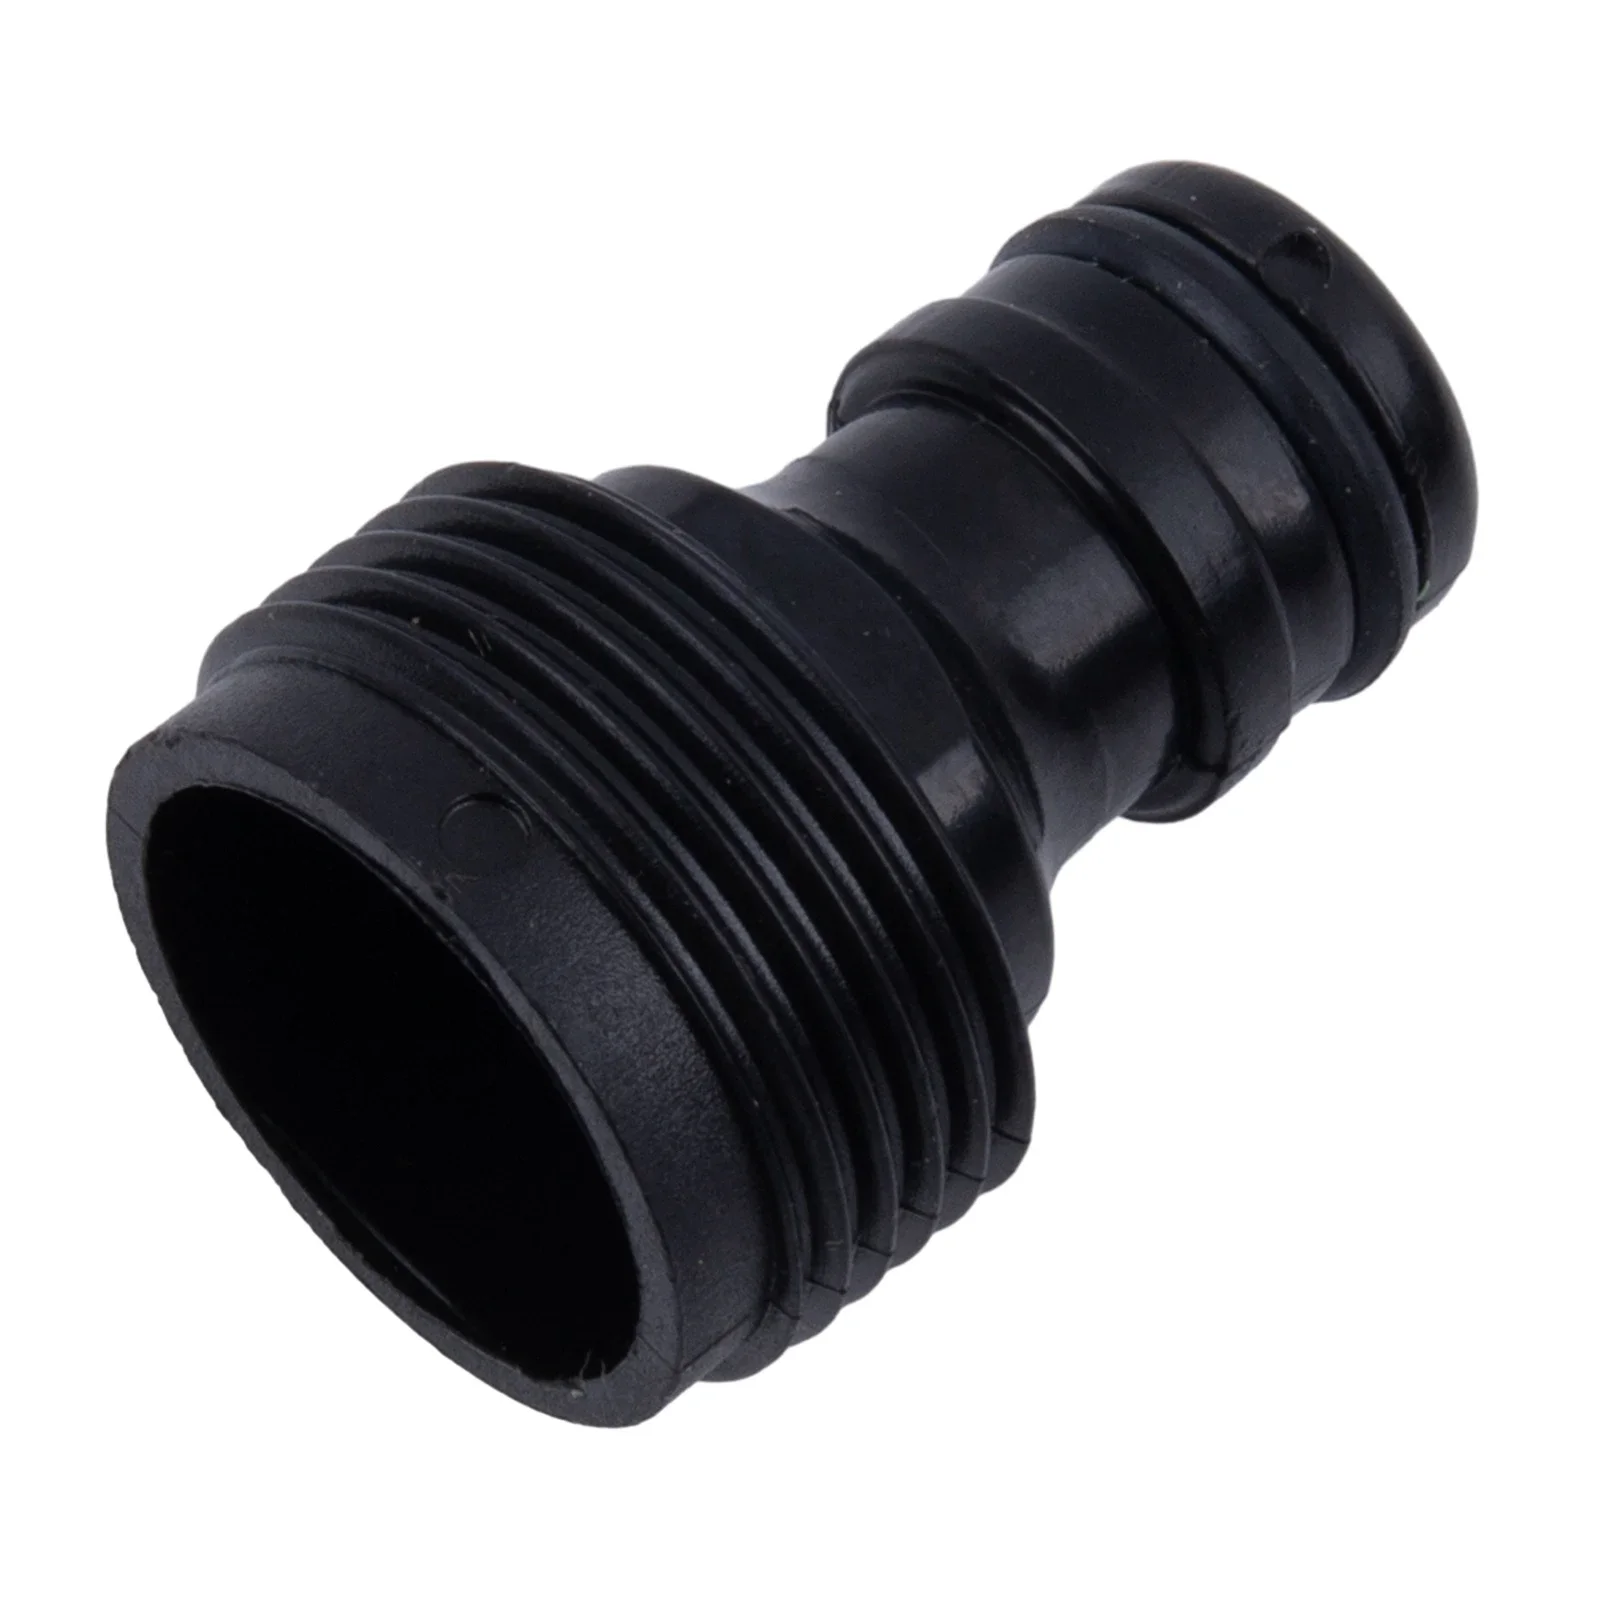 

Convenient Hose Quick Connectors Pack Of 10 Plastic Garden Hose Fittings Perfect Adapter For Your Gardening Needs